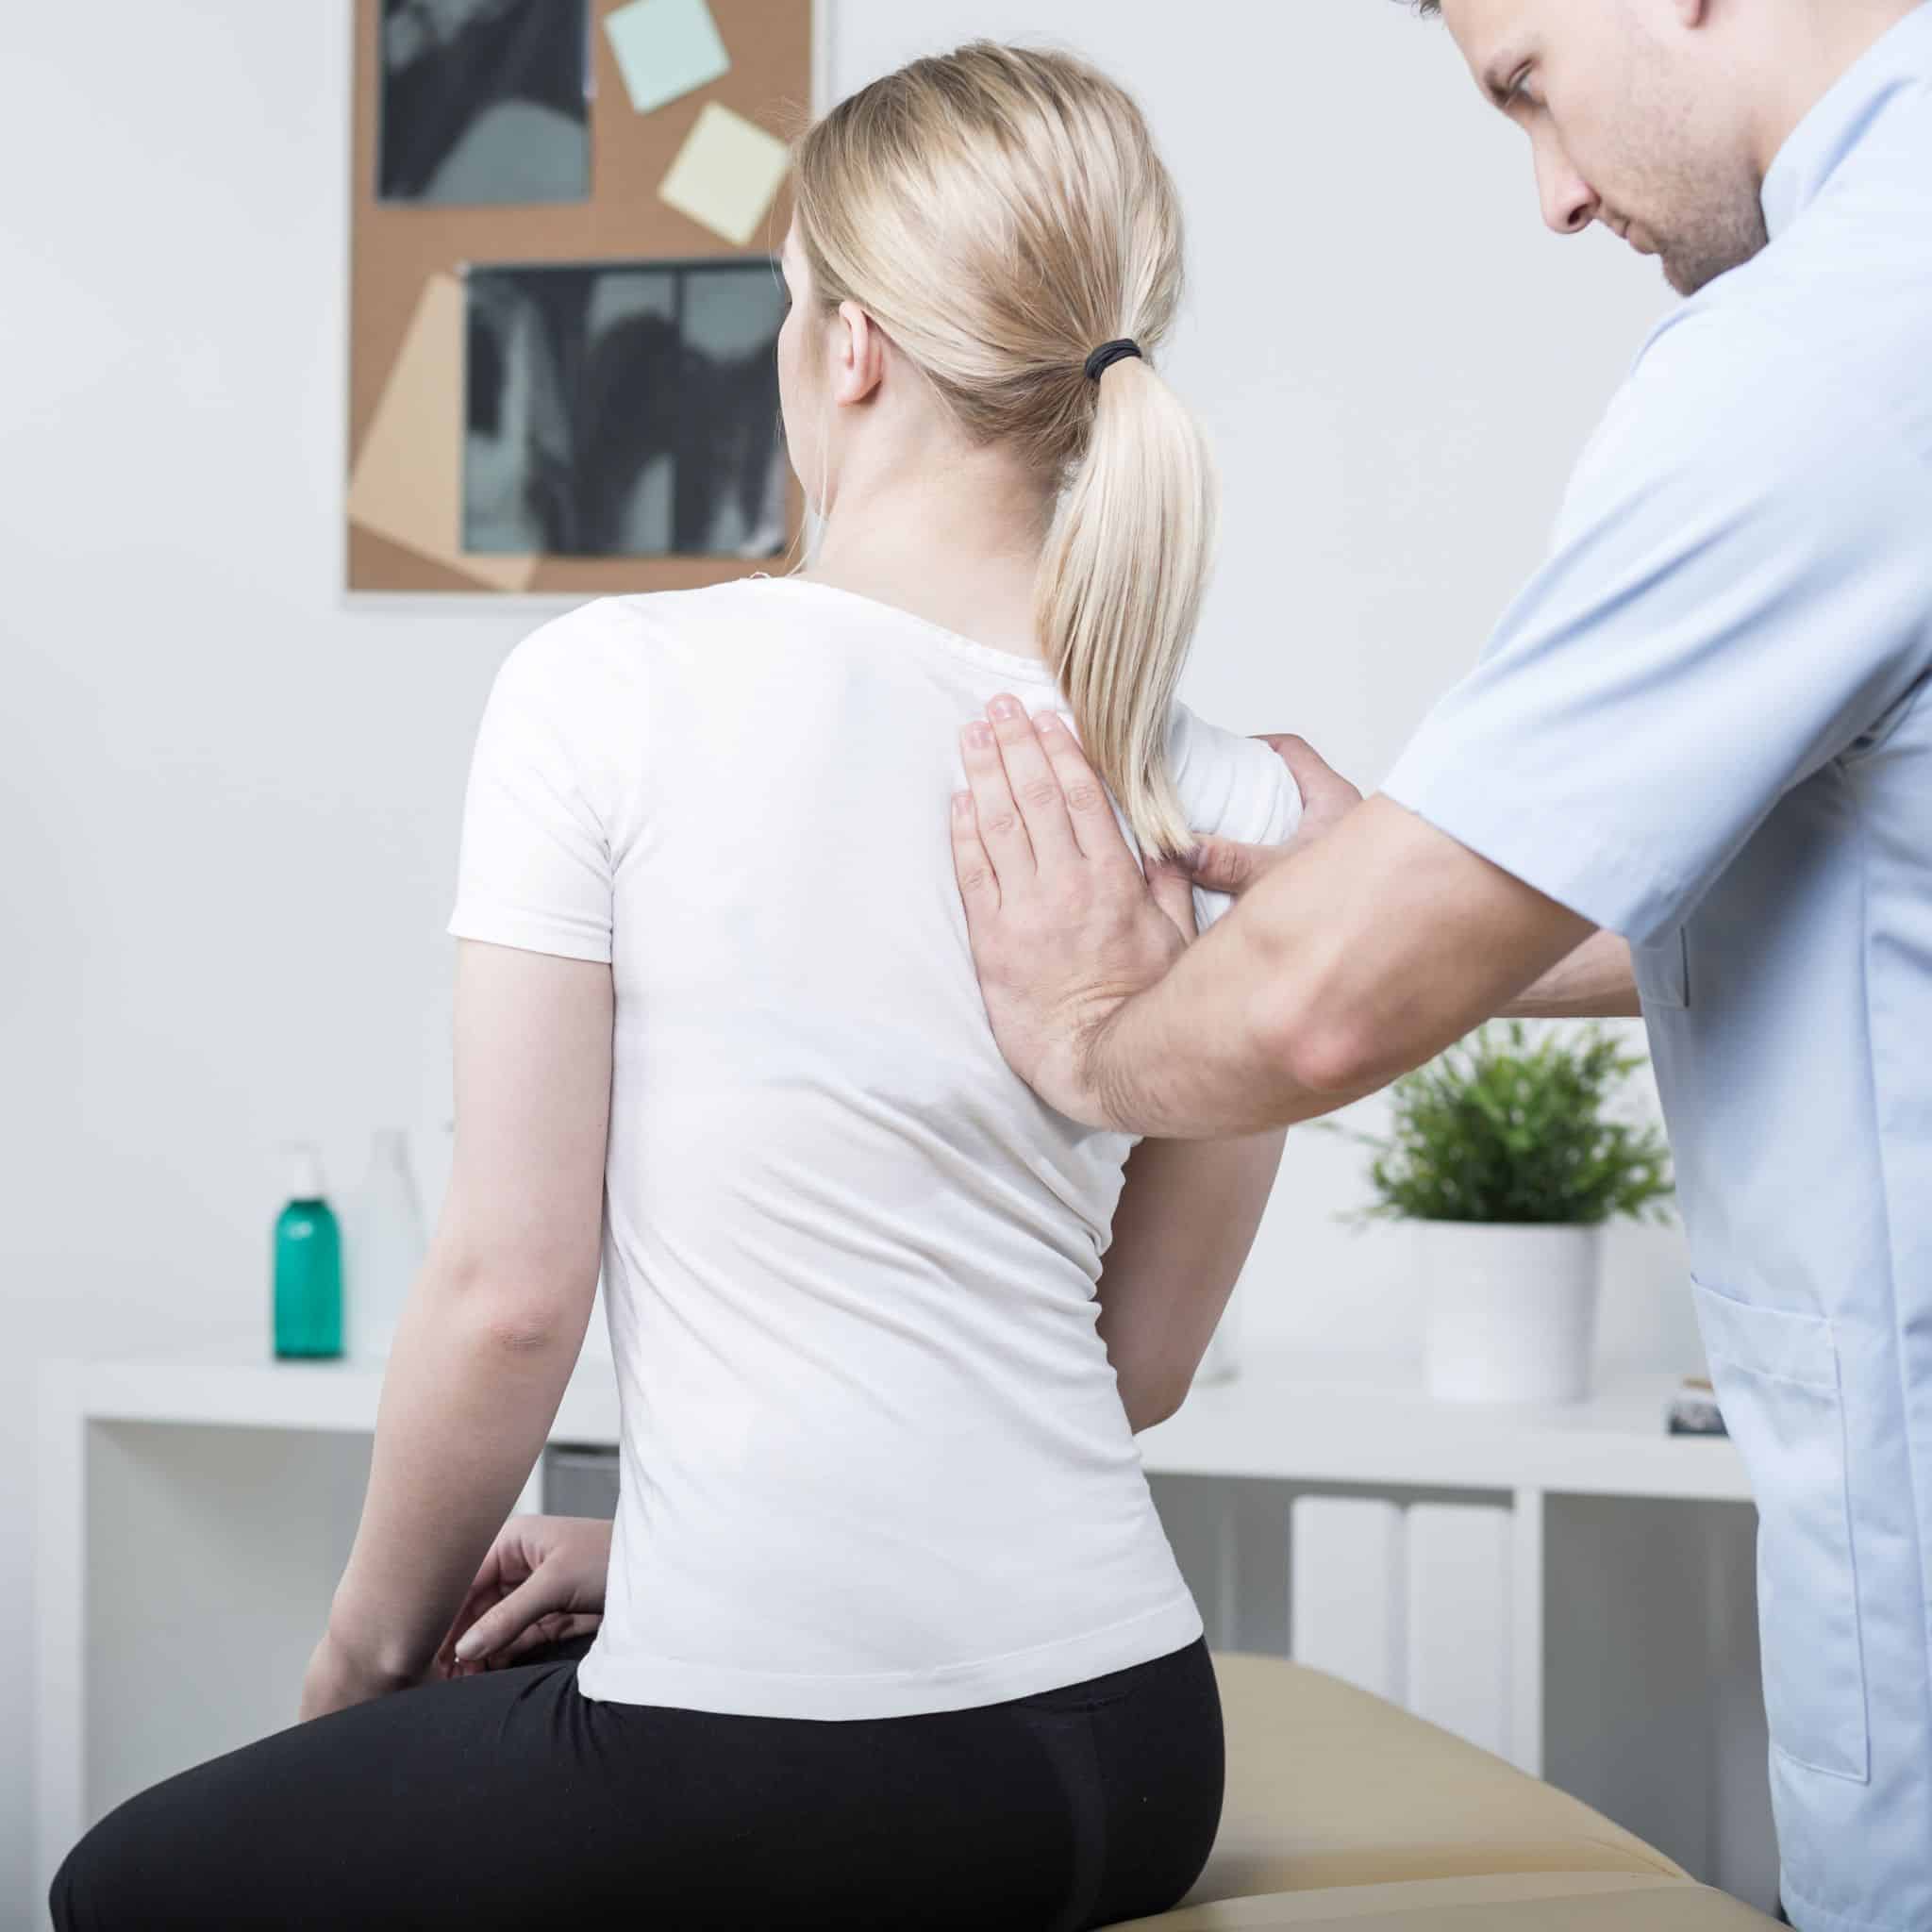 Chiropractic care adjustments being performed by a chiropractor in the patient’s right shoulder and upper back.